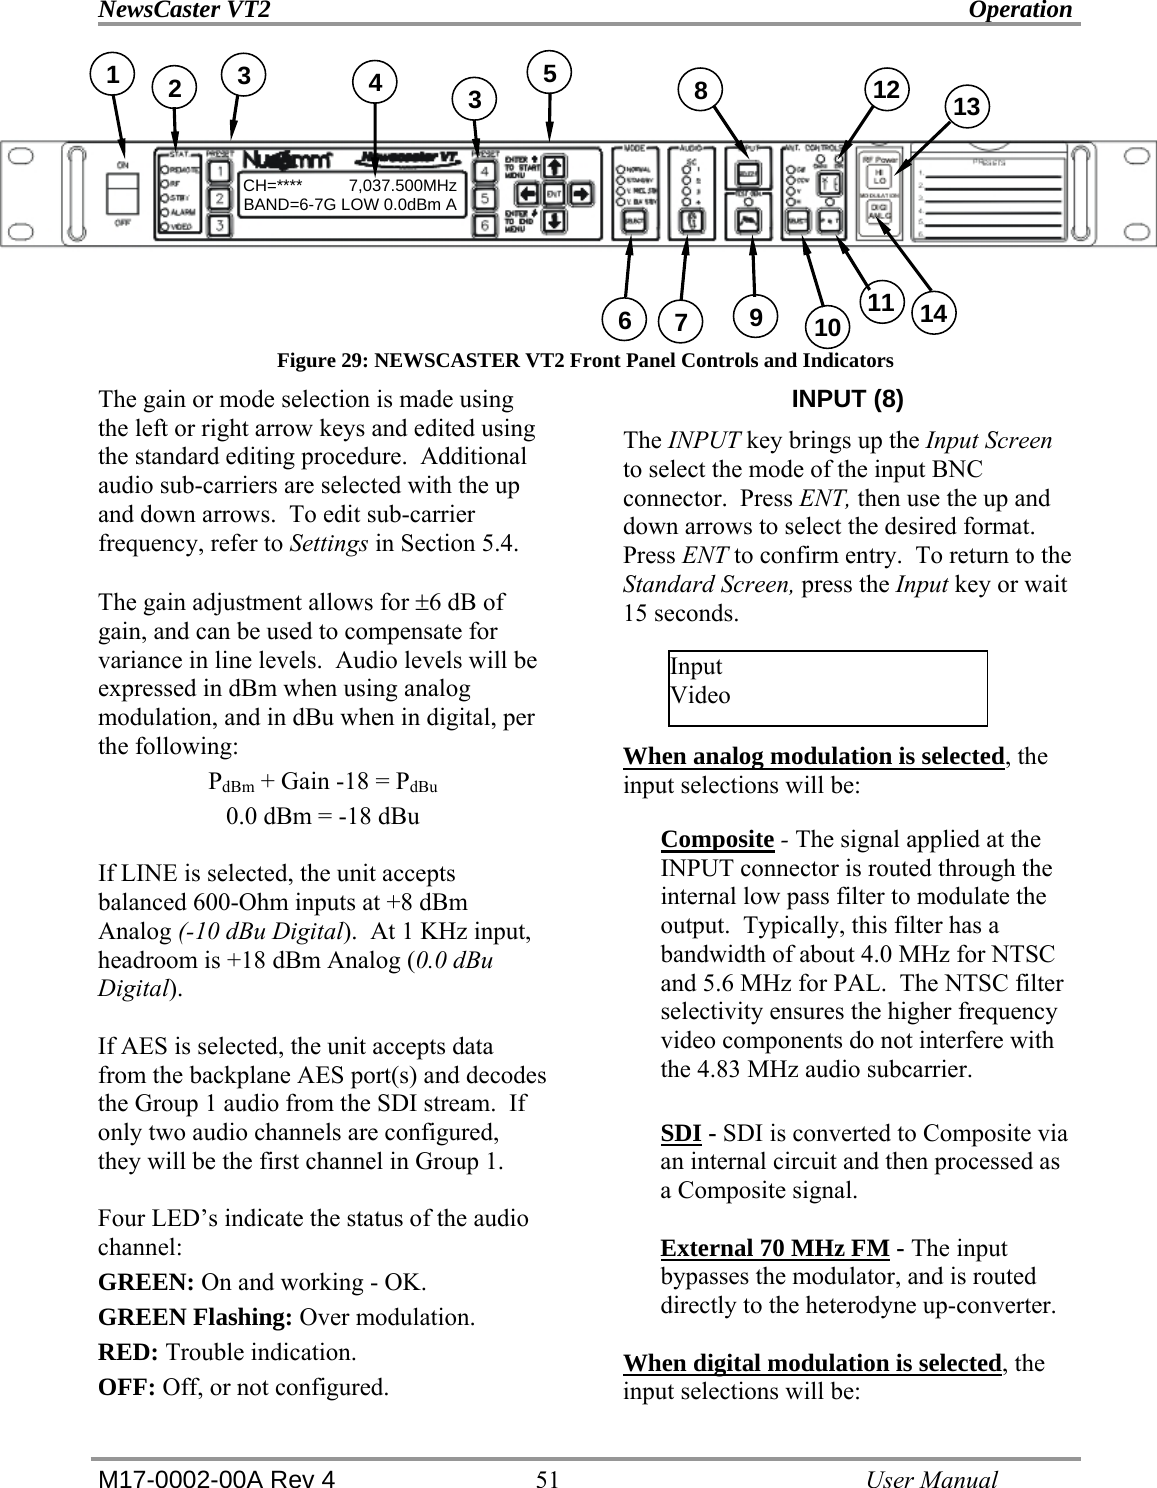 NewsCaster VT2    Operation  M17-0002-00A Rev 4 51   User Manual          Figure 29: NEWSCASTER VT2 Front Panel Controls and Indicators The gain or mode selection is made using the left or right arrow keys and edited using the standard editing procedure.  Additional audio sub-carriers are selected with the up and down arrows.  To edit sub-carrier frequency, refer to Settings in Section 5.4.  The gain adjustment allows for ±6 dB of gain, and can be used to compensate for variance in line levels.  Audio levels will be expressed in dBm when using analog modulation, and in dBu when in digital, per the following:   PdBm + Gain -18 = PdBu 0.0 dBm = -18 dBu  If LINE is selected, the unit accepts balanced 600-Ohm inputs at +8 dBm Analog (-10 dBu Digital).  At 1 KHz input, headroom is +18 dBm Analog (0.0 dBu Digital).  If AES is selected, the unit accepts data from the backplane AES port(s) and decodes the Group 1 audio from the SDI stream.  If only two audio channels are configured, they will be the first channel in Group 1.  Four LED’s indicate the status of the audio channel: GREEN: On and working - OK. GREEN Flashing: Over modulation. RED: Trouble indication. OFF: Off, or not configured. INPUT (8) The INPUT key brings up the Input Screen to select the mode of the input BNC connector.  Press ENT, then use the up and down arrows to select the desired format. Press ENT to confirm entry.  To return to the Standard Screen, press the Input key or wait 15 seconds.     When analog modulation is selected, the input selections will be: Composite - The signal applied at the INPUT connector is routed through the internal low pass filter to modulate the output.  Typically, this filter has a bandwidth of about 4.0 MHz for NTSC and 5.6 MHz for PAL.  The NTSC filter selectivity ensures the higher frequency video components do not interfere with the 4.83 MHz audio subcarrier.  SDI - SDI is converted to Composite via an internal circuit and then processed as a Composite signal.  External 70 MHz FM - The input bypasses the modulator, and is routed directly to the heterodyne up-converter.  When digital modulation is selected, the input selections will be: Input Video CH=****          7,037.500MHz      BAND=6-7G LOW 0.0dBm A 1  4 2  3  5  8 3  12  13 11 10 9 7 6  14 